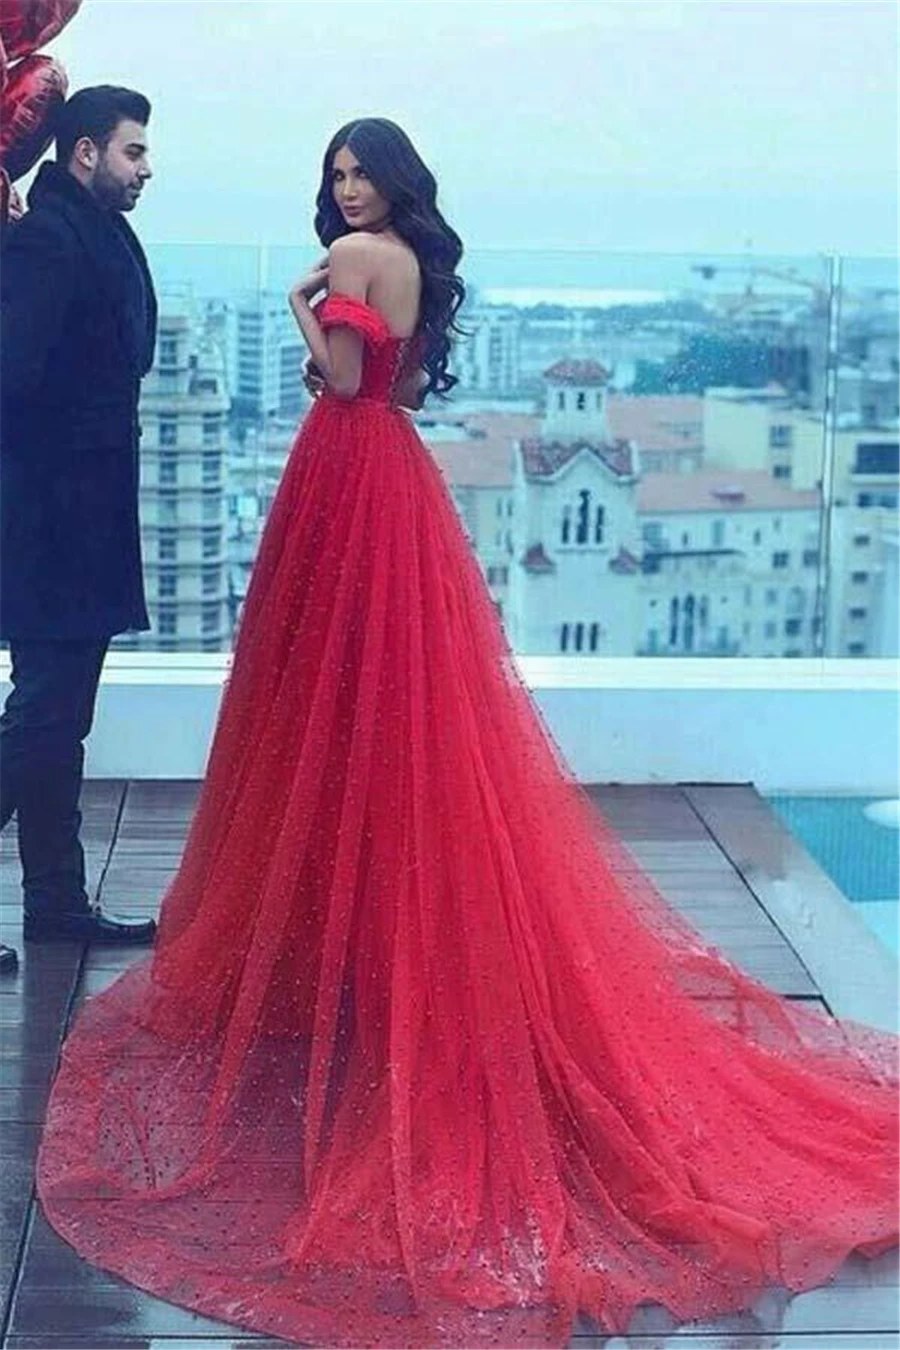 

2023 Elegant A-line Red Prom Dresses Off-the-shoulder Beading Pearls Sweetheart Neckline Long Train Evening Wedding Bridal Gowns